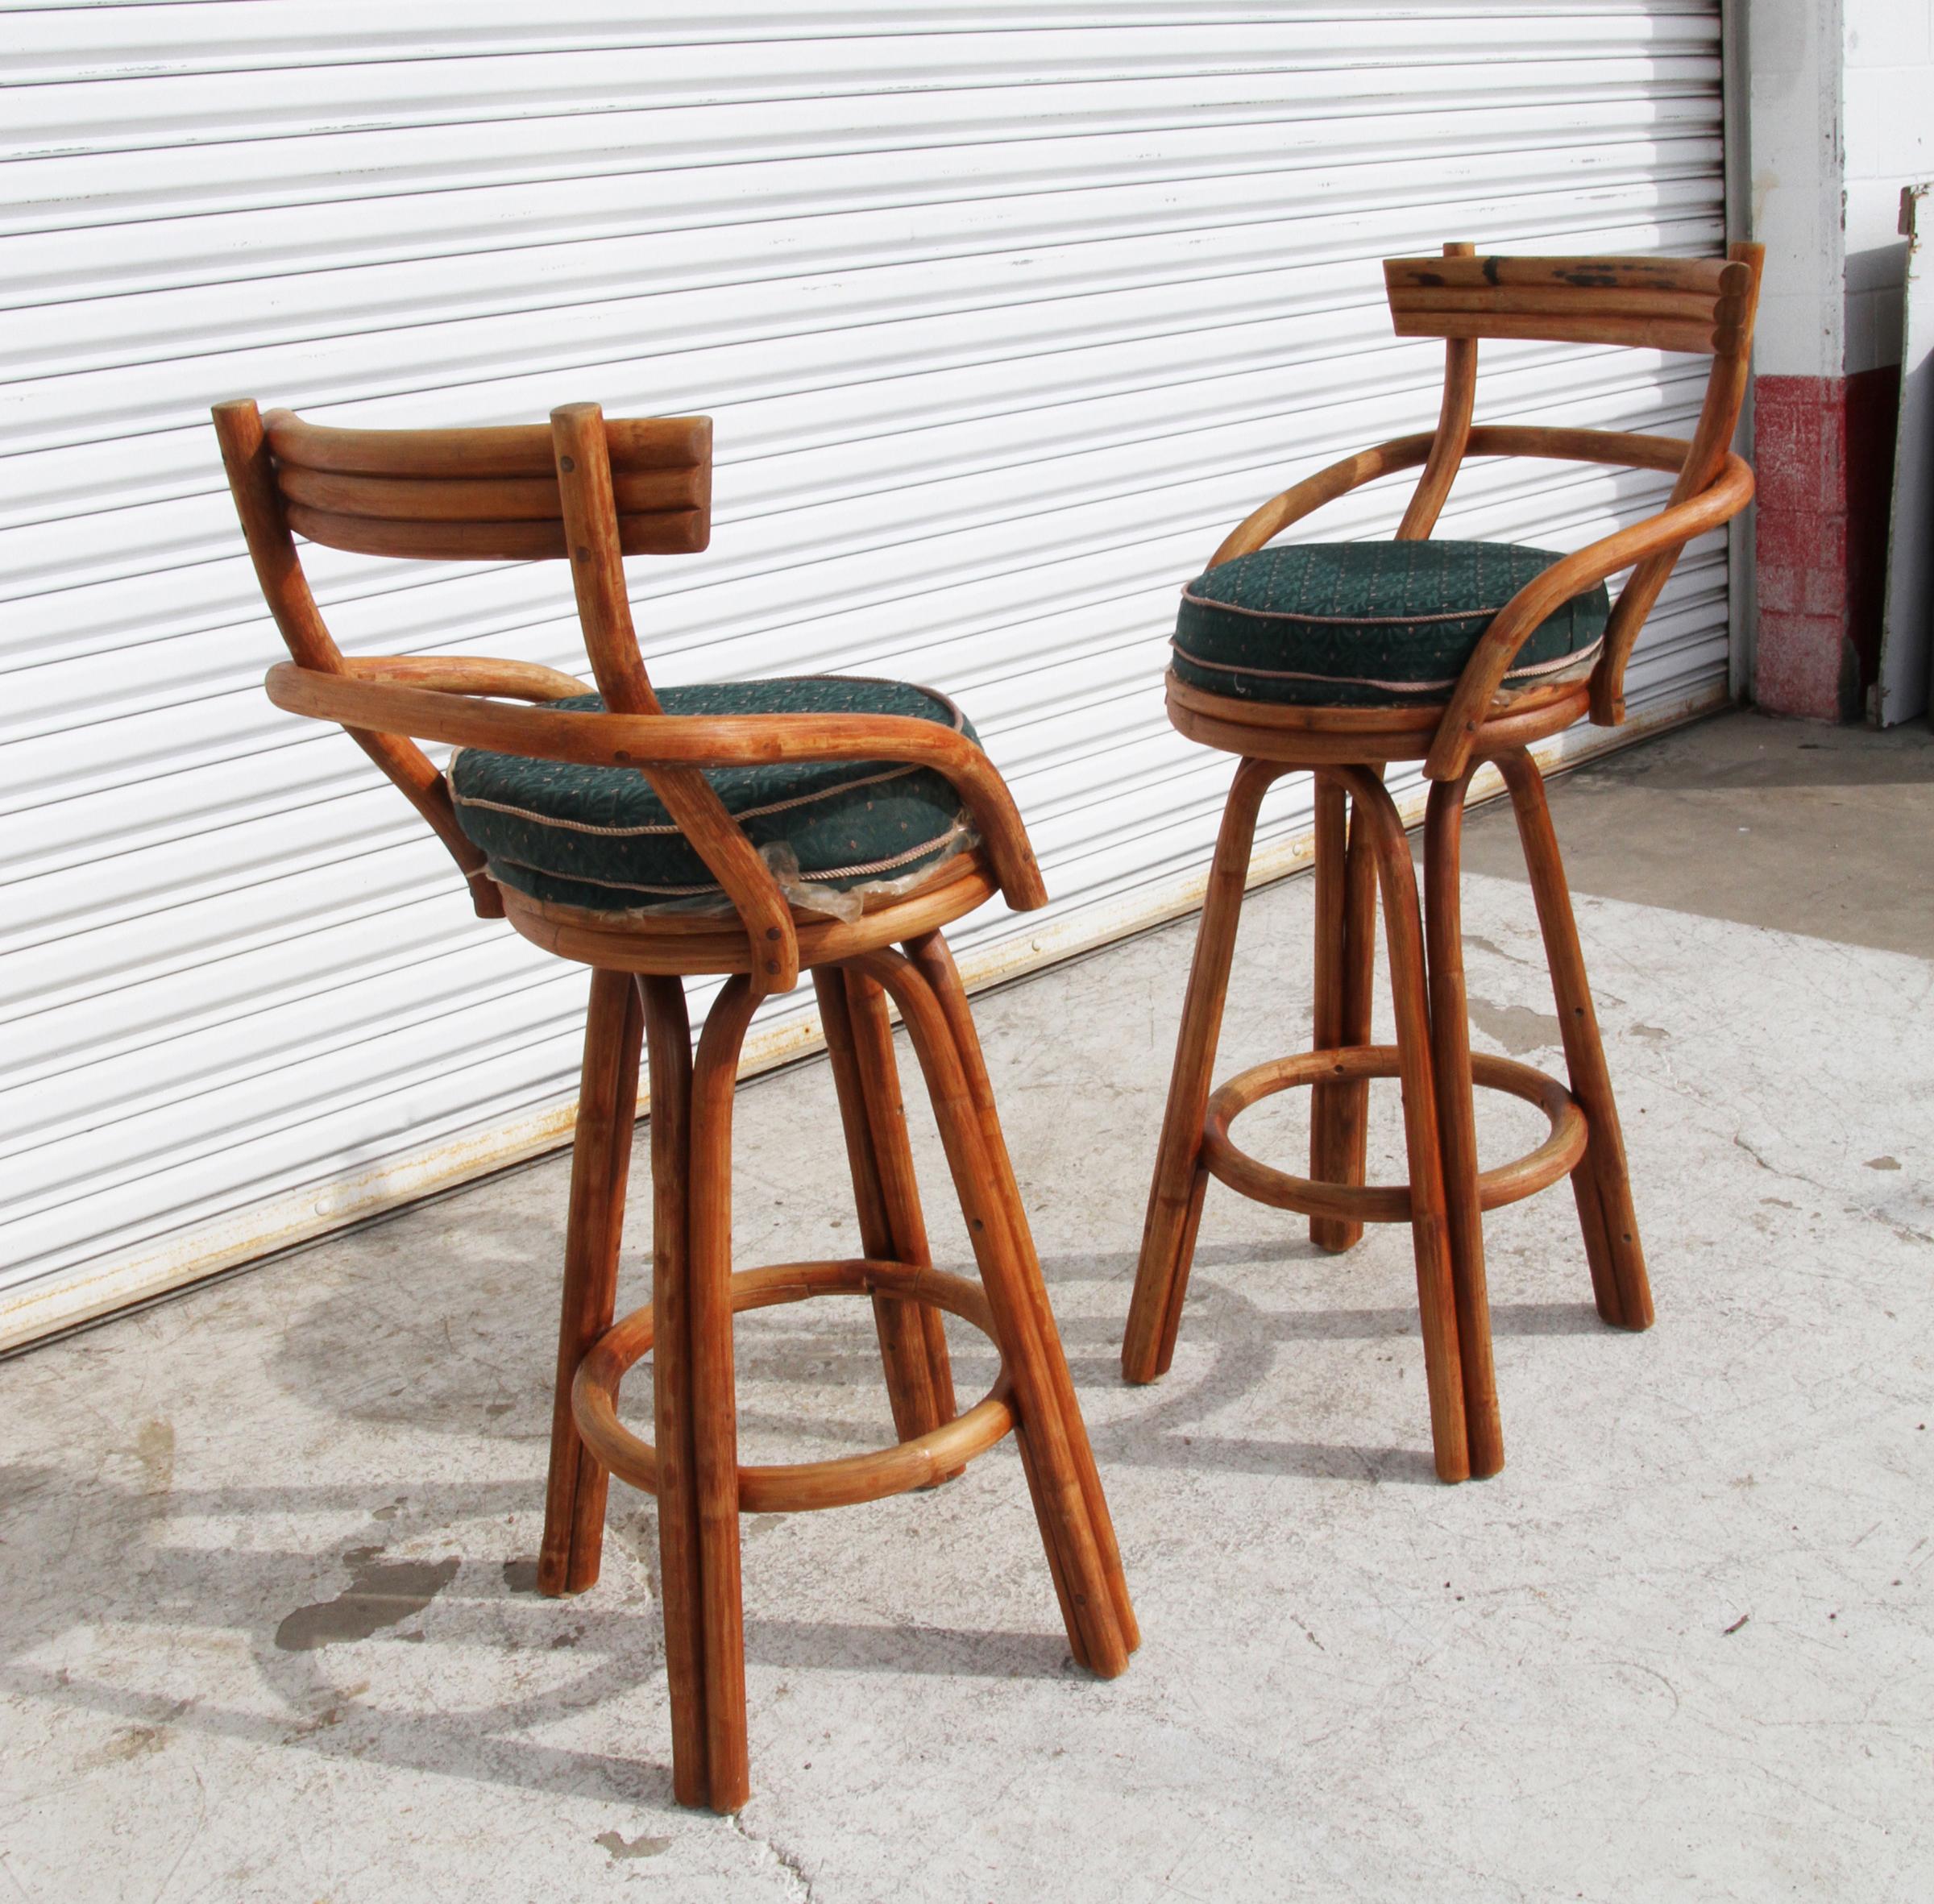 Paul Frankl Style Stools Faux Bamboo

3 Strand backs with swivel. Reupholstery recommended.

